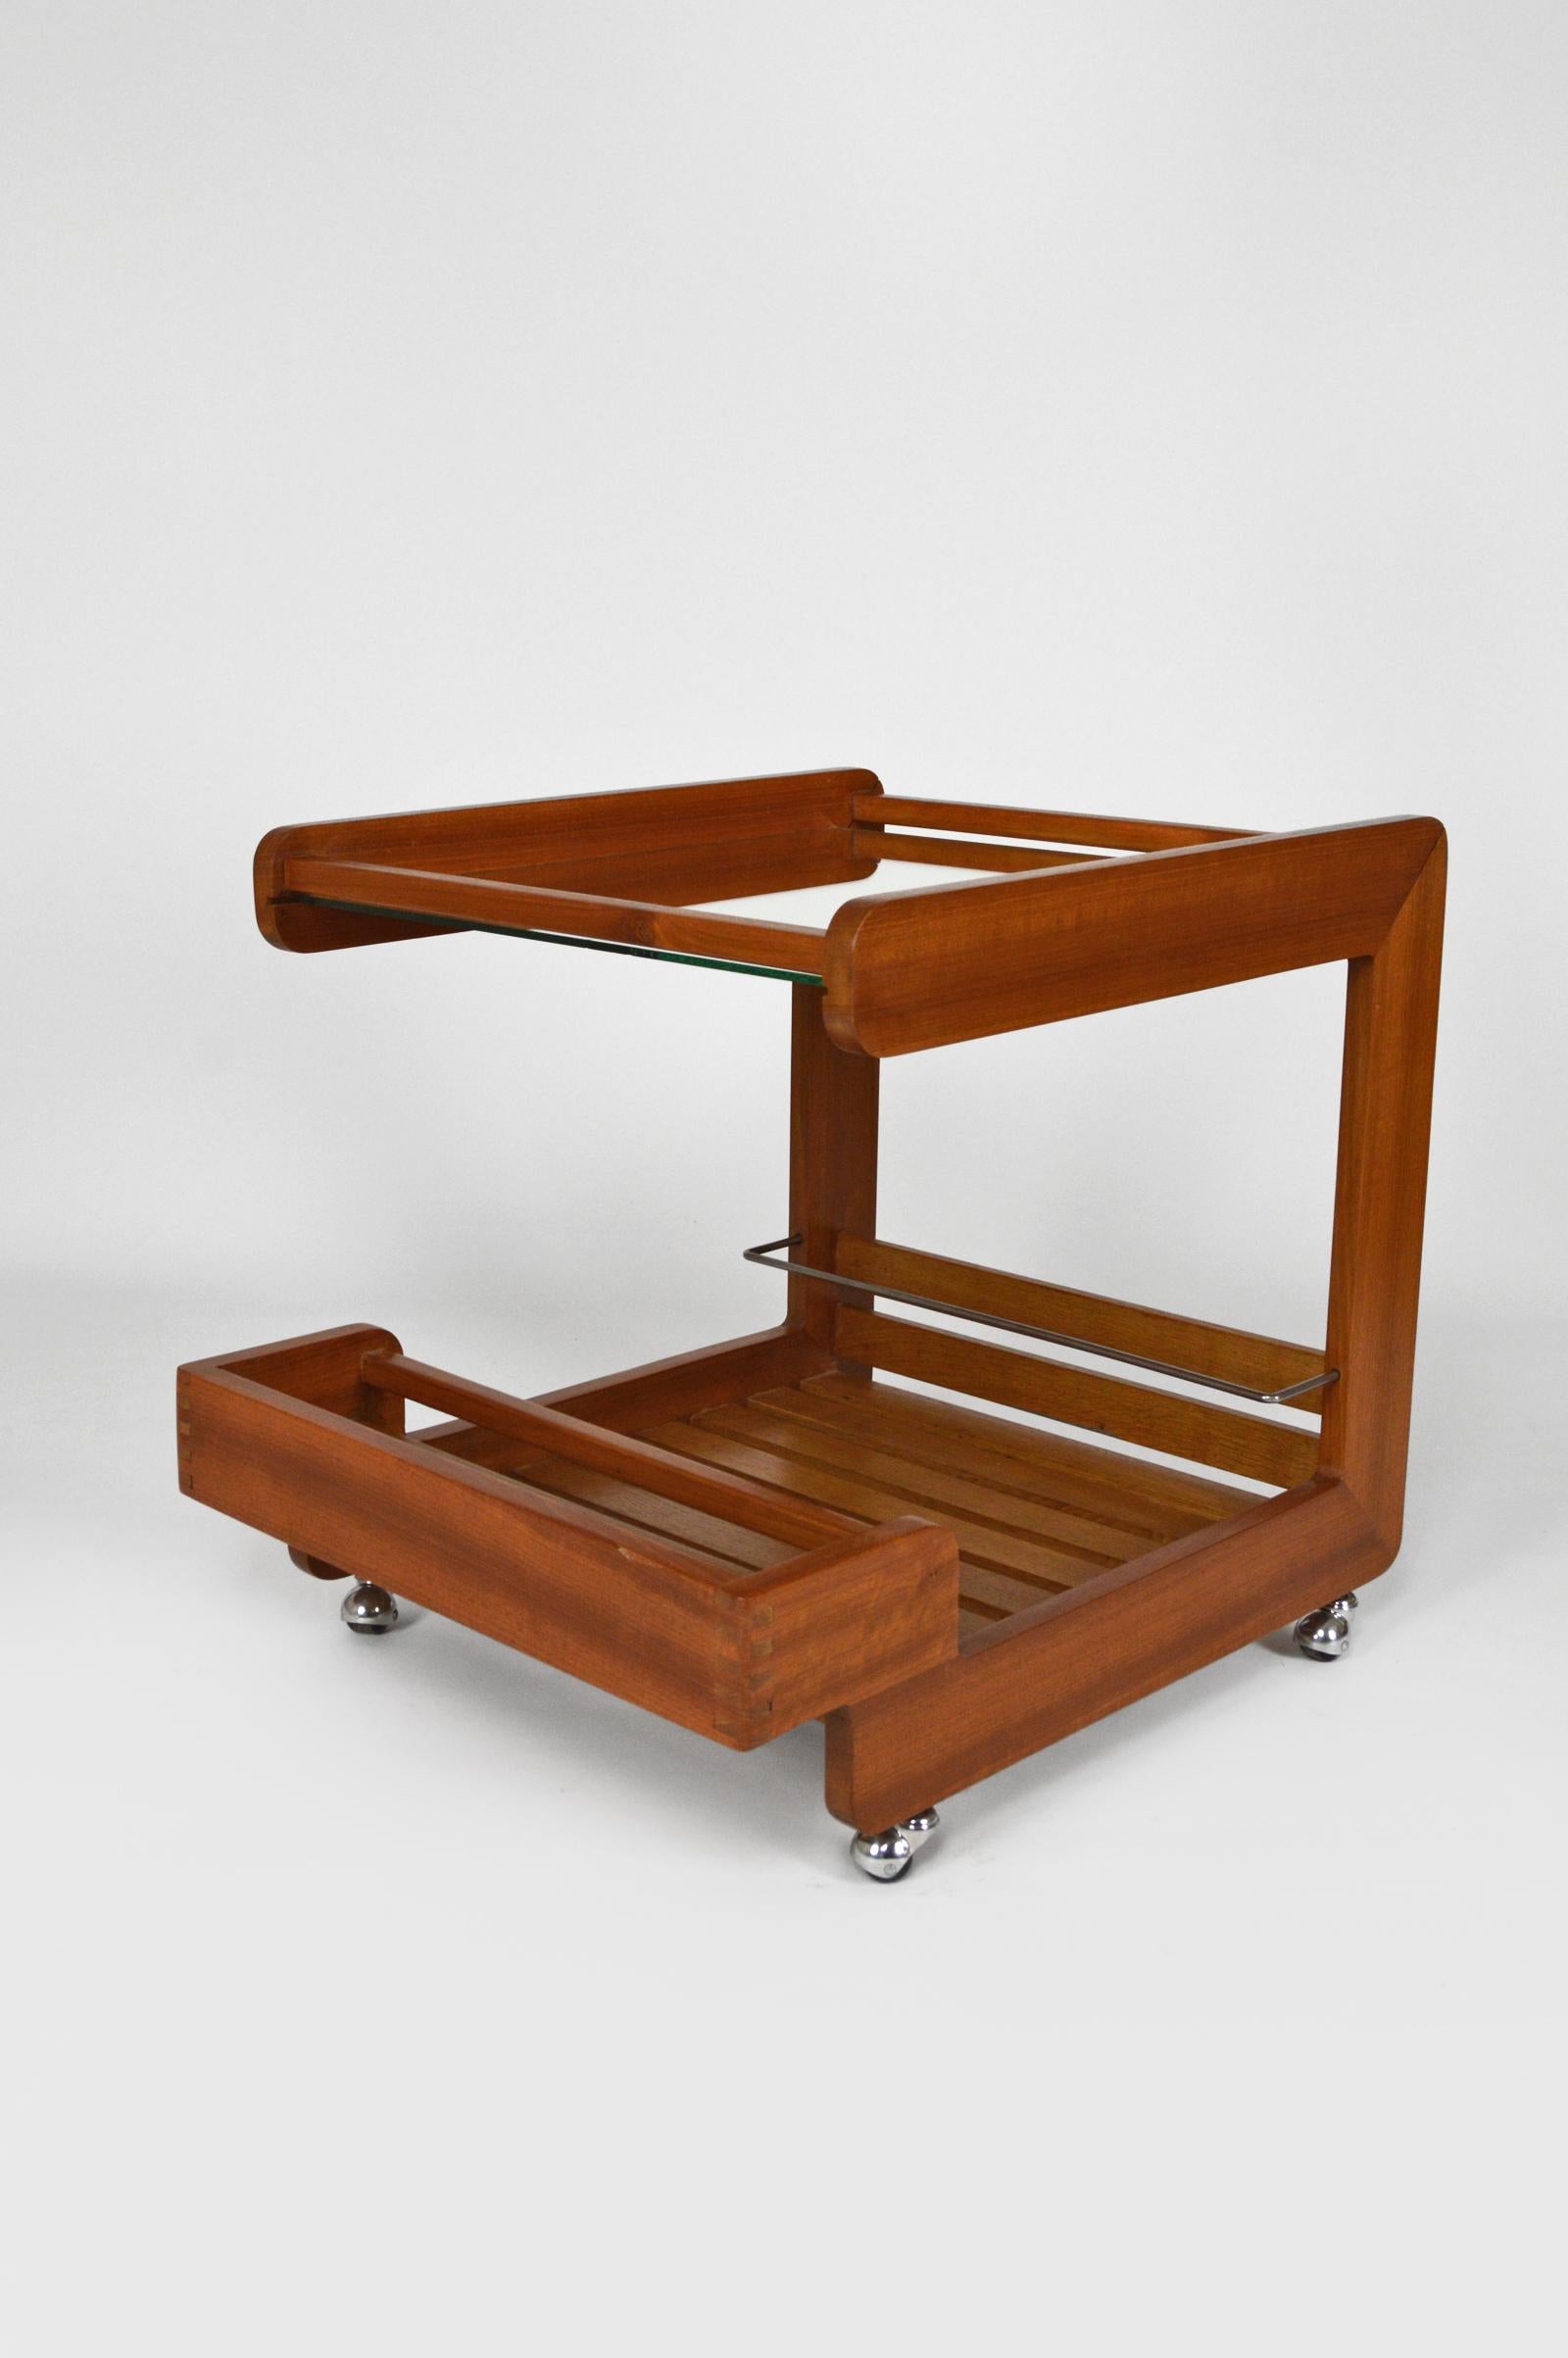 Rare cubic service table / trolley / bar cart.

Structure in solid teak. 
A mirror acts as a top shelf. 
Presence of a steel bar to hold bottles. Functional chrome wheels.

Mid-century Modern, Scandinavia, circa 1970.

In very good